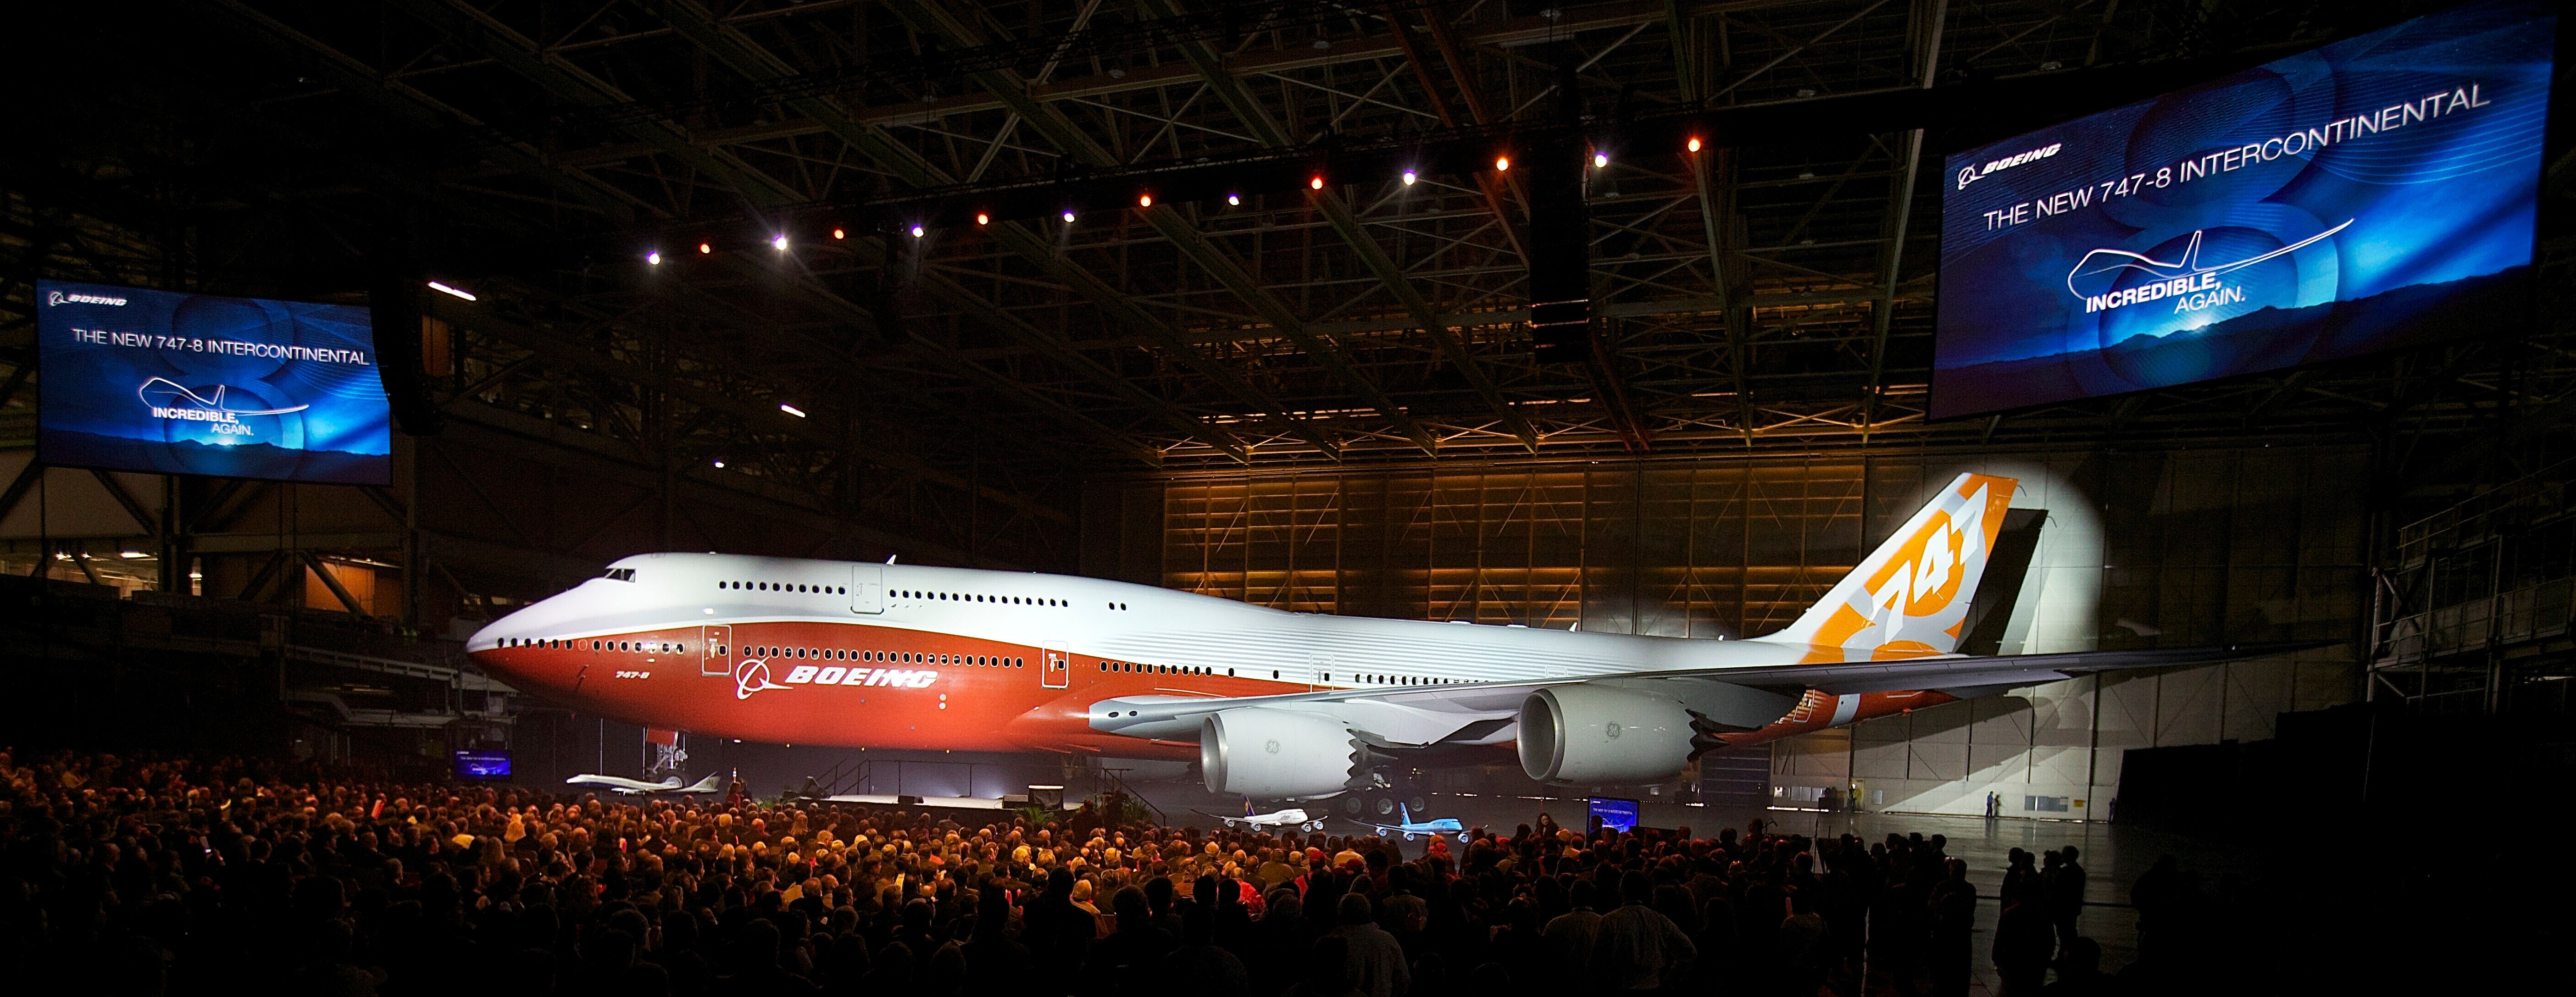 747-8 introduction with massive crowd 